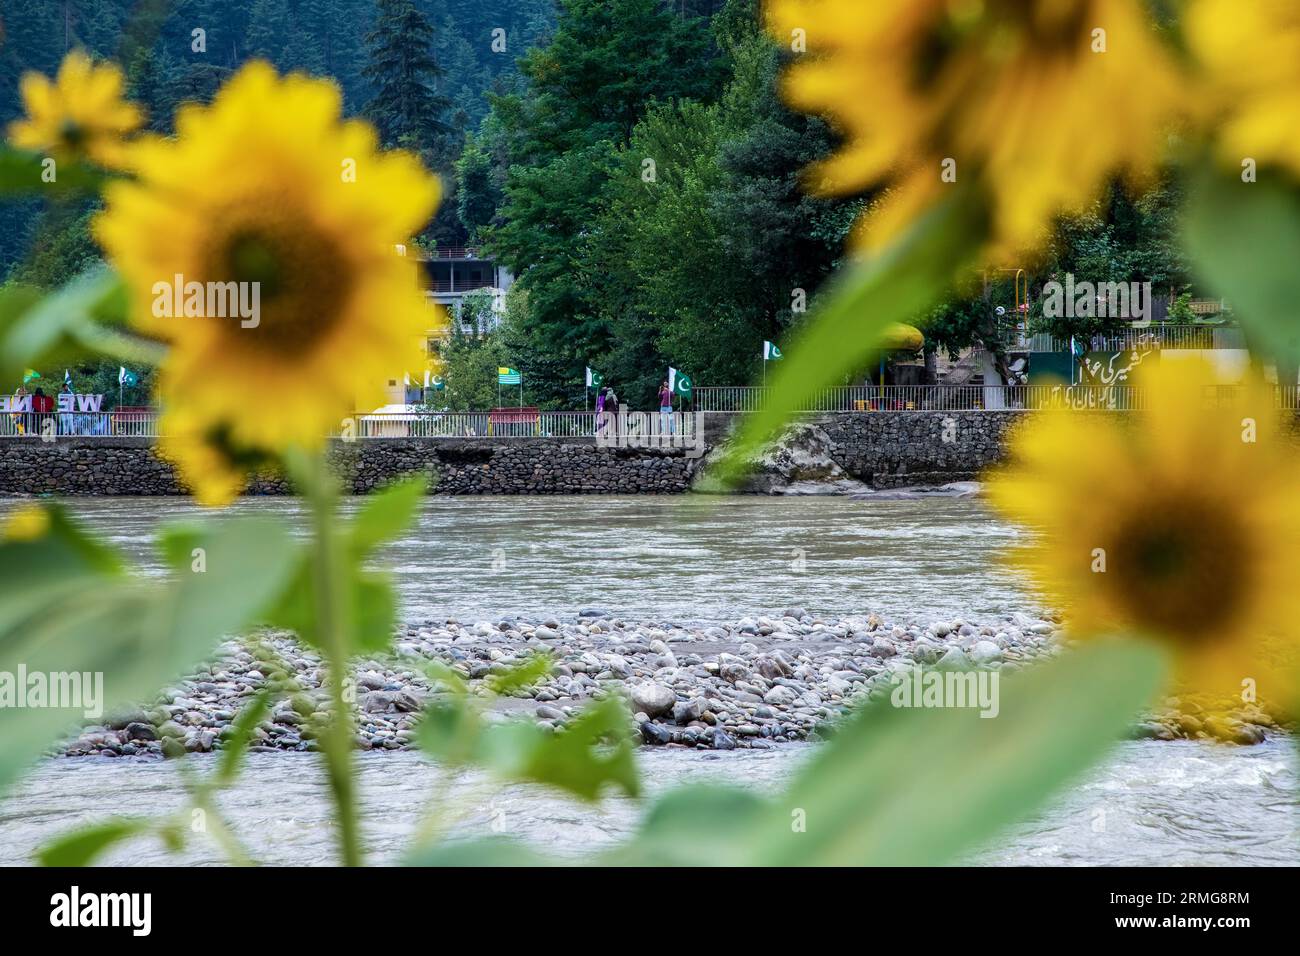 August 25, 2023, Keran Kupwara, Jammu and Kashmir, India: Pakistani and Kashmiri flags are seen installed on the banks of Neelam river or Kishan Ganga that has divided Kashmir into two parts controlled by nuclear rivals India and Pakistan. The river acts as a disputed line of control and flows through a village called Keran from both sides which is located on the northern side of Indian Kashmir's Border district Kupwara some 150kms from Srinagar and 93kms from Muzaffarabad, in the Pakistan side of Kashmir. (Credit Image: © Faisal Bashir/SOPA Images via ZUMA Press Wire) EDITORIAL USAGE ONLY! No Stock Photo